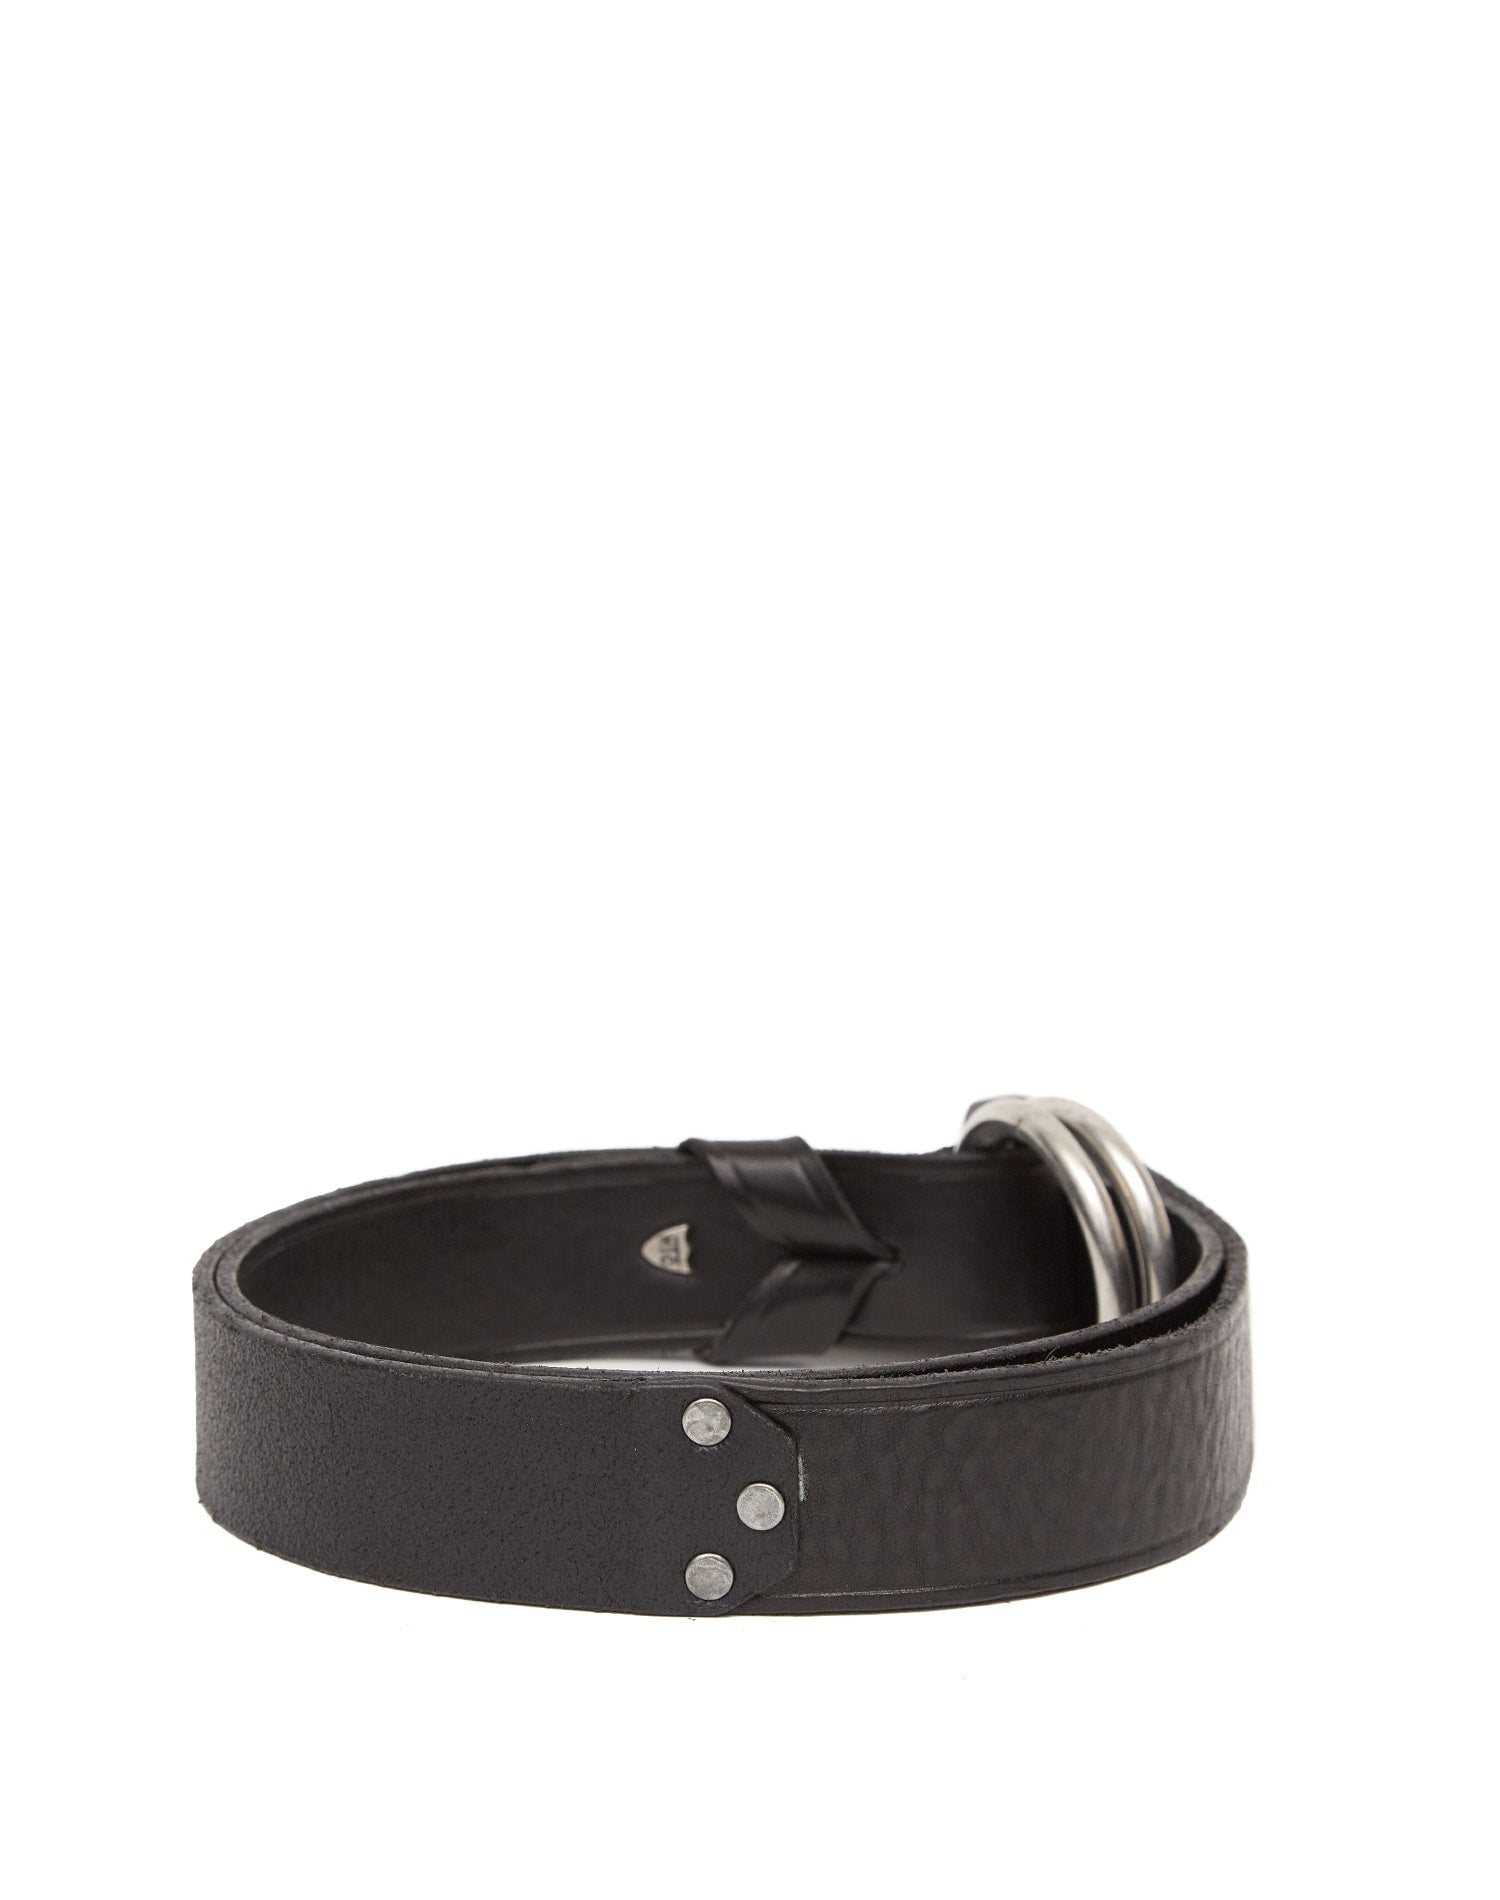 MARK BELT Black leather belt with ring buckle. Height: 3.5 cm. Made in Italy. HTC LOS ANGELES